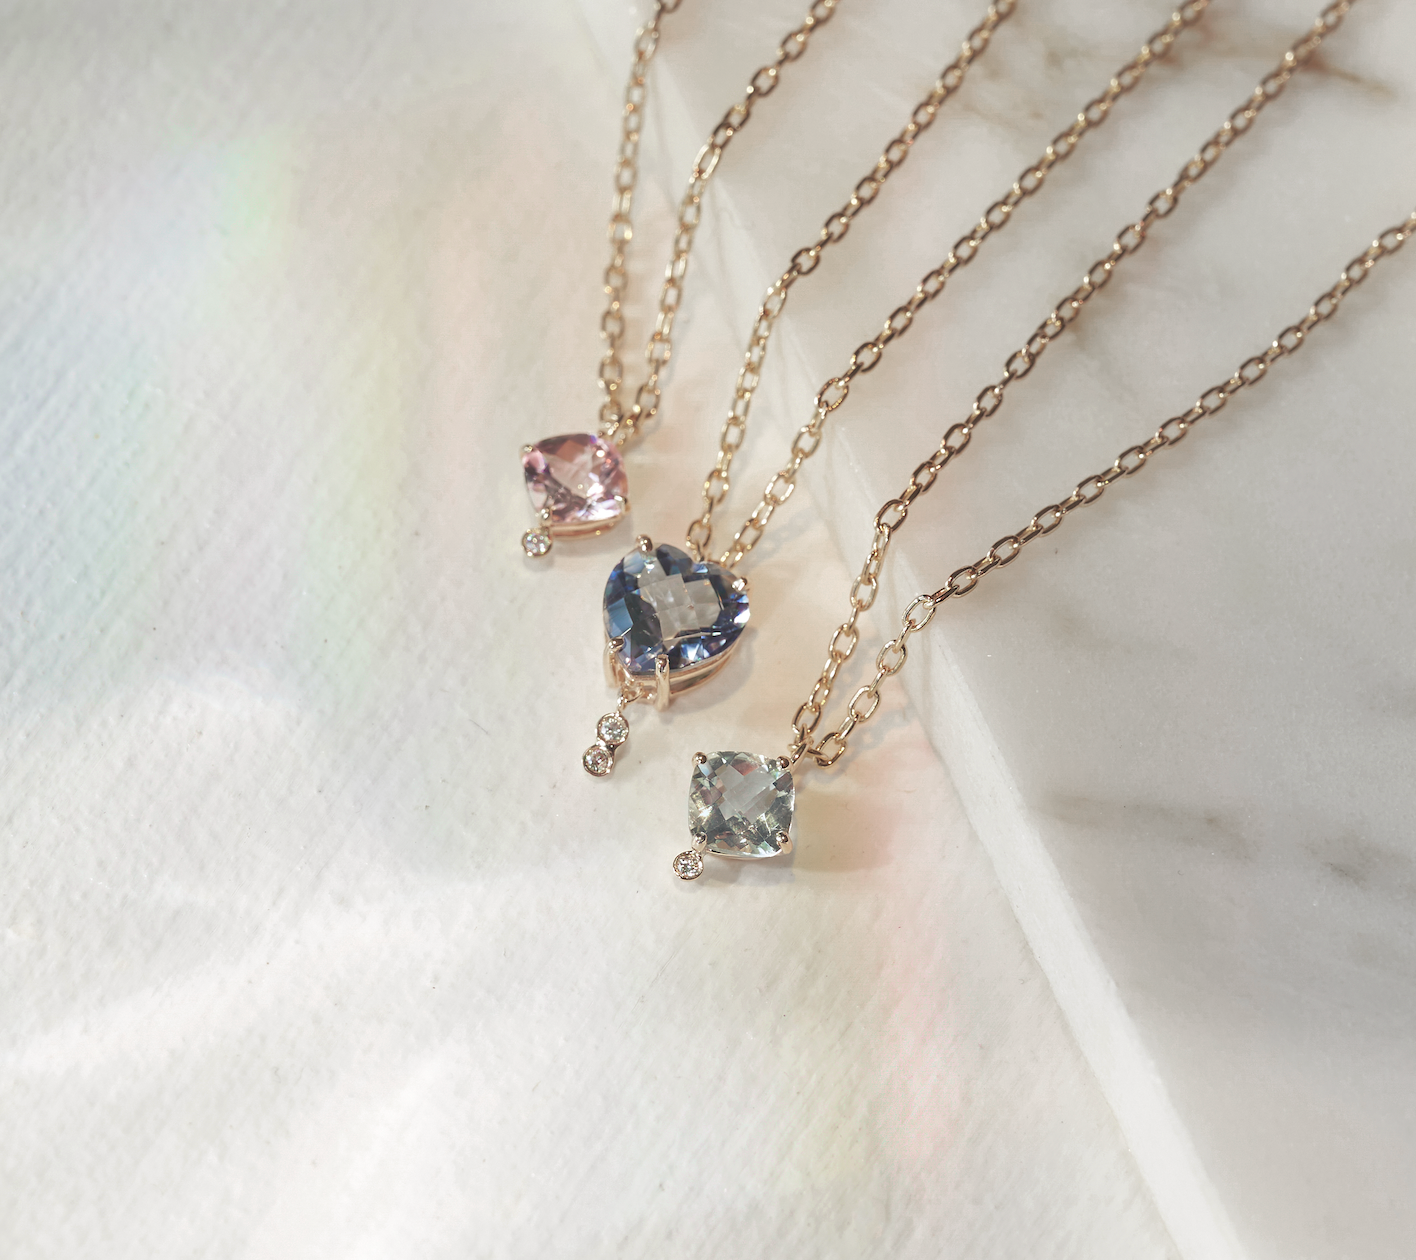 Morganite, Blue Quartz, Aquamarine Jewelry 18k Yellow Gold Fine Jewelry made in NYC with love Shop Now!